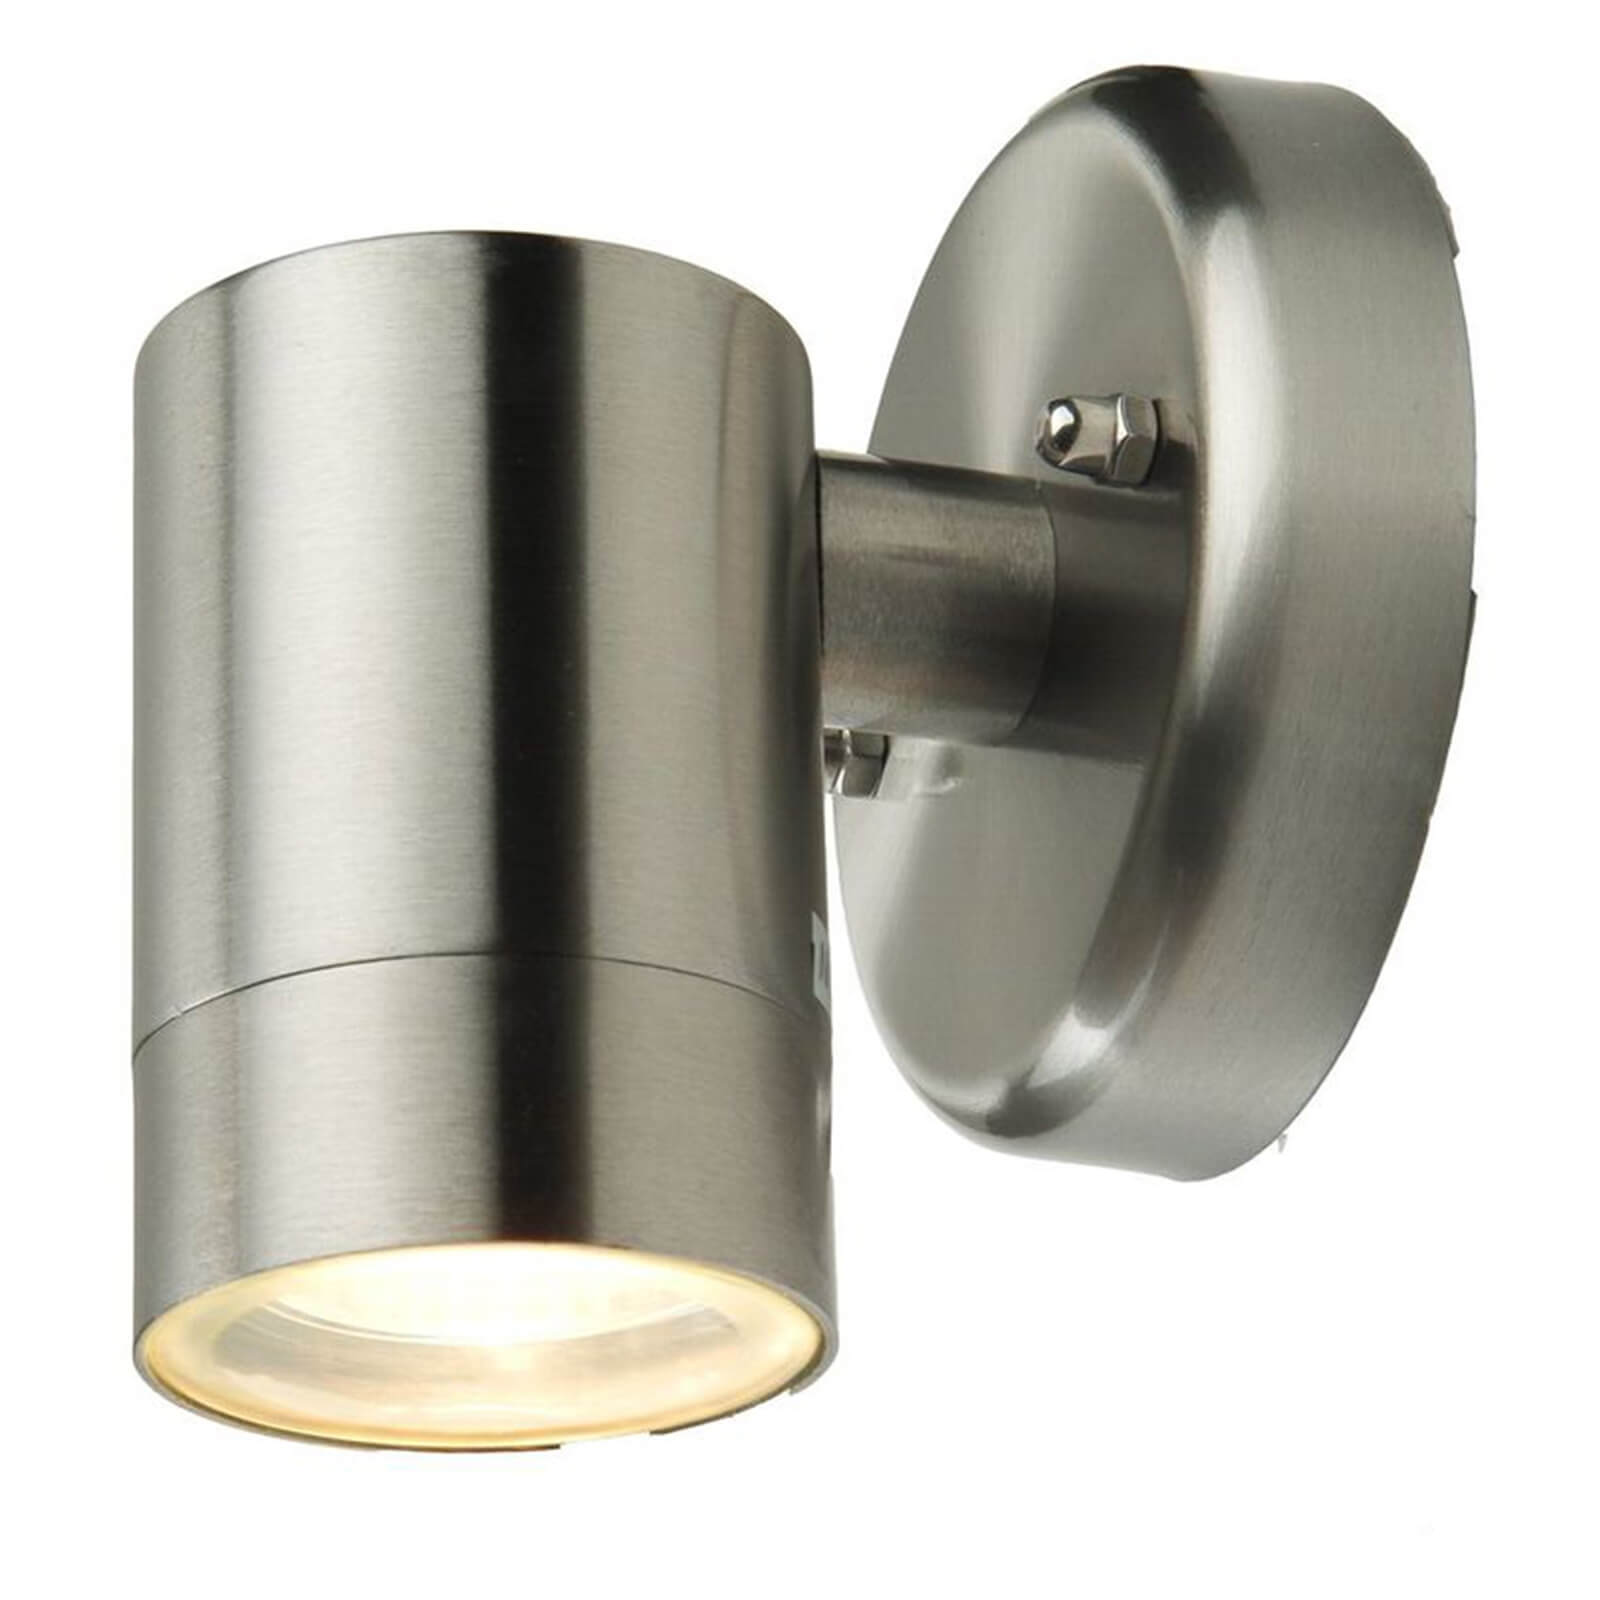 Lutec Rado Outdoor Down Wall Light - Stainless steel